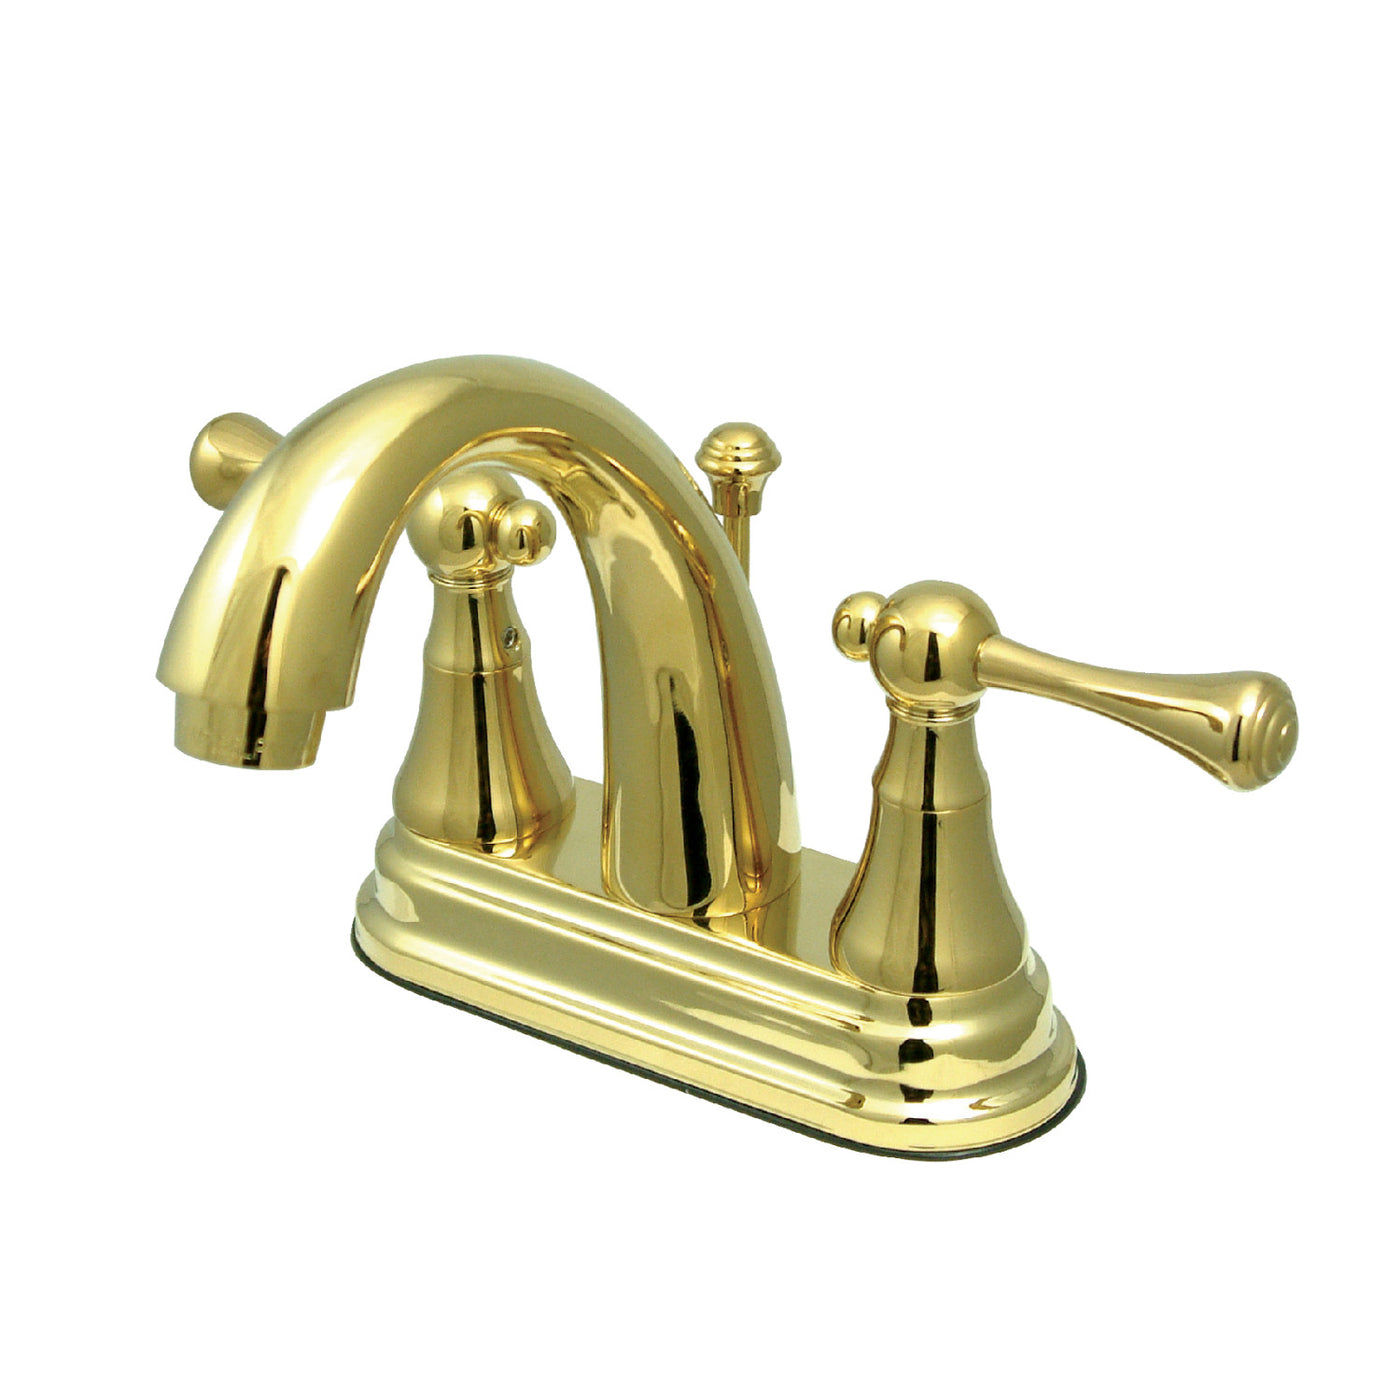 Elements of Design ES7612BL 4-Inch Centerset Bathroom Faucet with Brass Pop-Up, Polished Brass